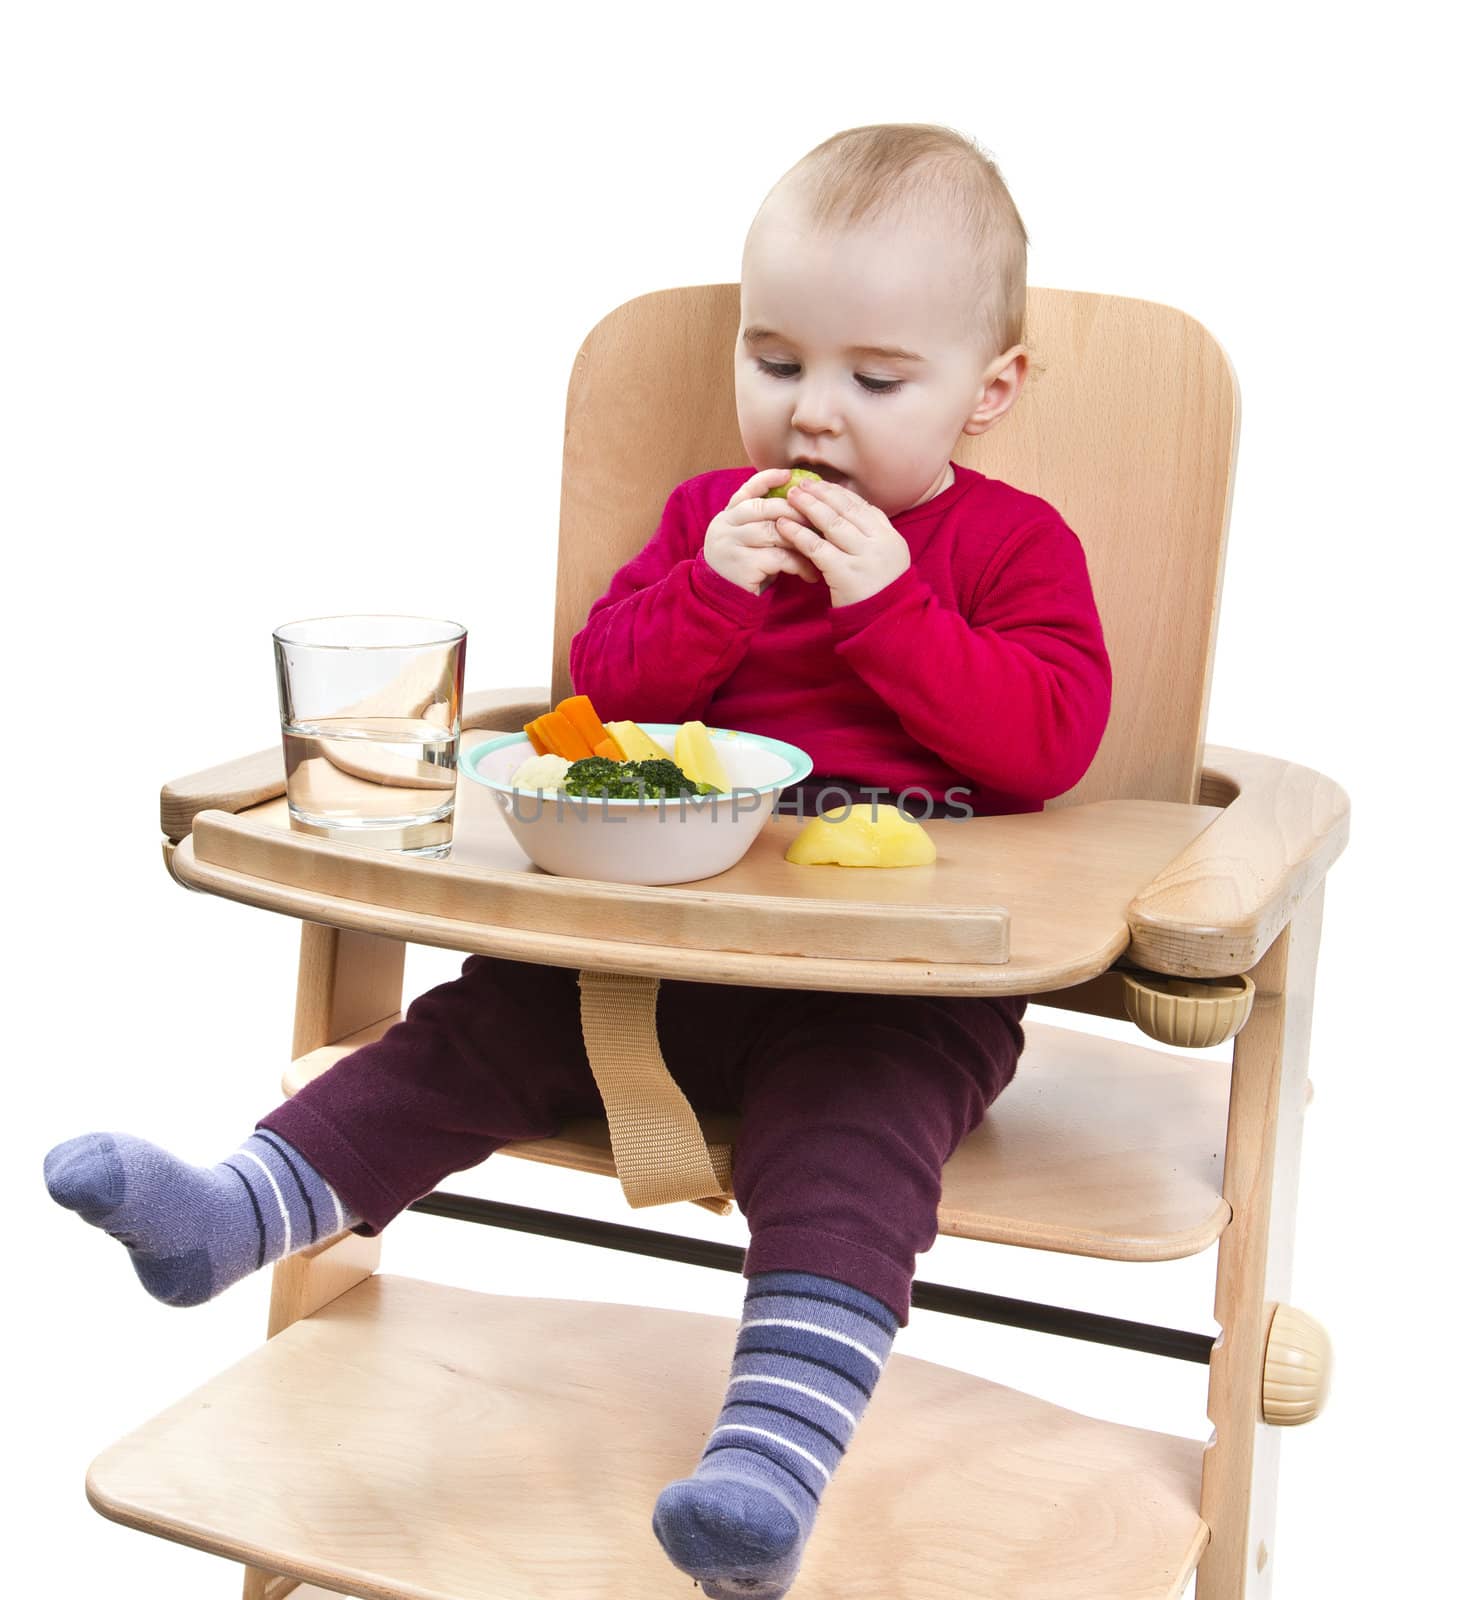 young child in red shirt eating vegetables in wooden chair. Isolated on white background